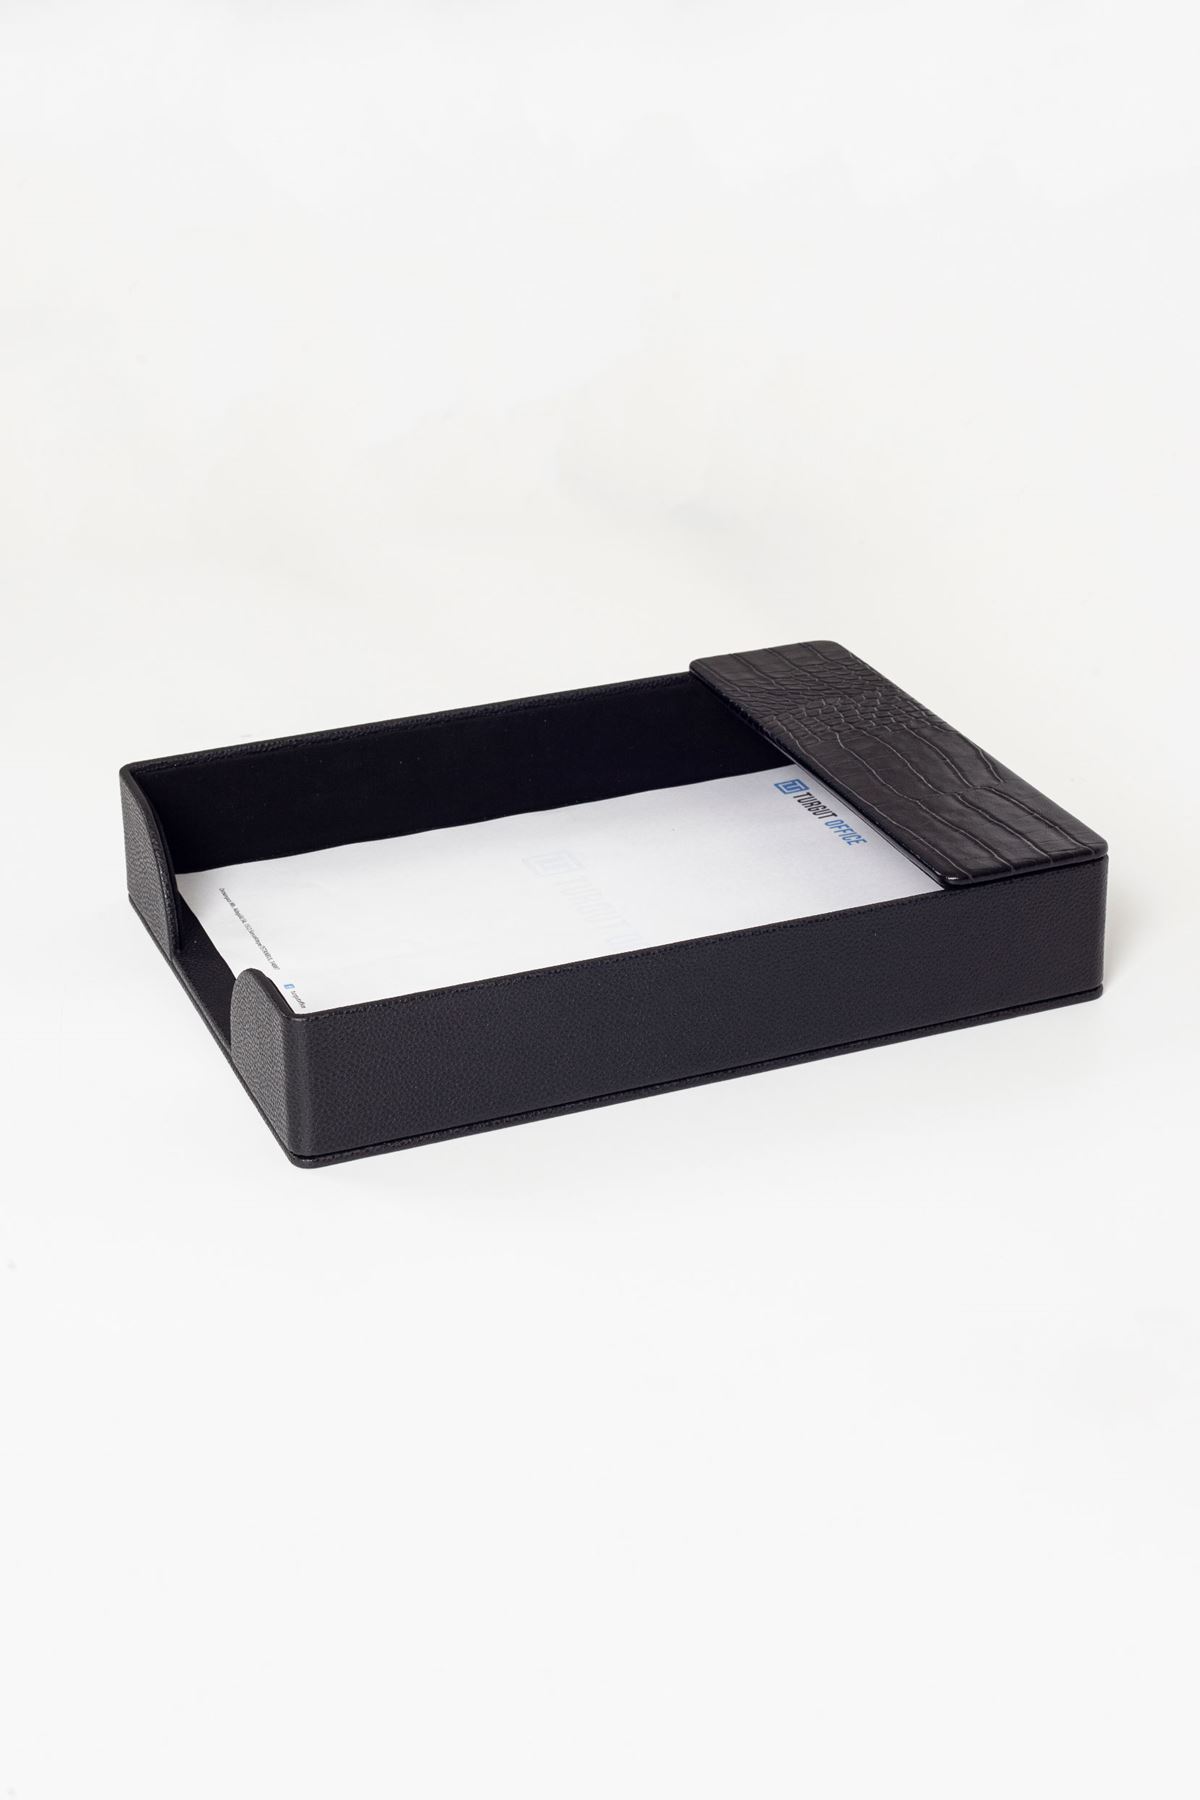 Roma Black Leather Document Shelf with Croco detail